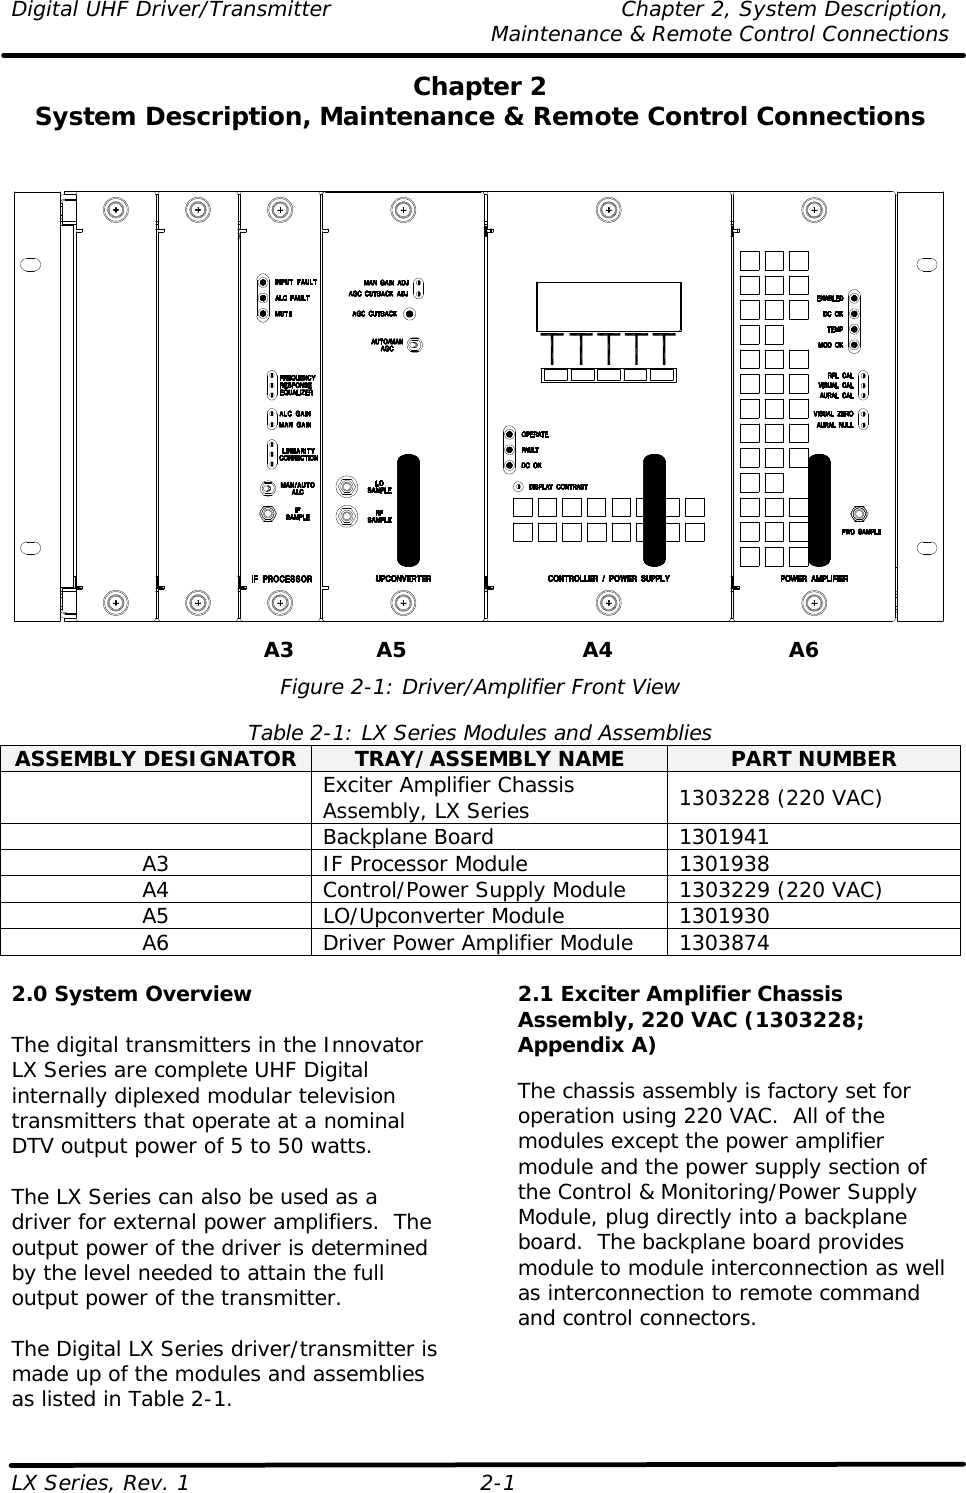 Digital UHF Driver/Transmitter Chapter 2, System Description,  Maintenance &amp; Remote Control Connections LX Series, Rev. 1 2-1 Chapter 2 System Description, Maintenance &amp; Remote Control Connections      Figure 2-1: Driver/Amplifier Front View  Table 2-1: LX Series Modules and Assemblies ASSEMBLY DESIGNATOR TRAY/ASSEMBLY NAME PART NUMBER  Exciter Amplifier Chassis Assembly, LX Series 1303228 (220 VAC)  Backplane Board 1301941 A3 IF Processor Module 1301938 A4 Control/Power Supply Module 1303229 (220 VAC) A5 LO/Upconverter Module 1301930 A6 Driver Power Amplifier Module 1303874  2.0 System Overview  The digital transmitters in the Innovator LX Series are complete UHF Digital internally diplexed modular television transmitters that operate at a nominal DTV output power of 5 to 50 watts.  The LX Series can also be used as a driver for external power amplifiers.  The output power of the driver is determined by the level needed to attain the full output power of the transmitter.  The Digital LX Series driver/transmitter is made up of the modules and assemblies as listed in Table 2-1. 2.1 Exciter Amplifier Chassis Assembly, 220 VAC (1303228; Appendix A)  The chassis assembly is factory set for operation using 220 VAC.  All of the modules except the power amplifier module and the power supply section of the Control &amp; Monitoring/Power Supply Module, plug directly into a backplane board.  The backplane board provides module to module interconnection as well as interconnection to remote command and control connectors. A3 A5 A4 A6 